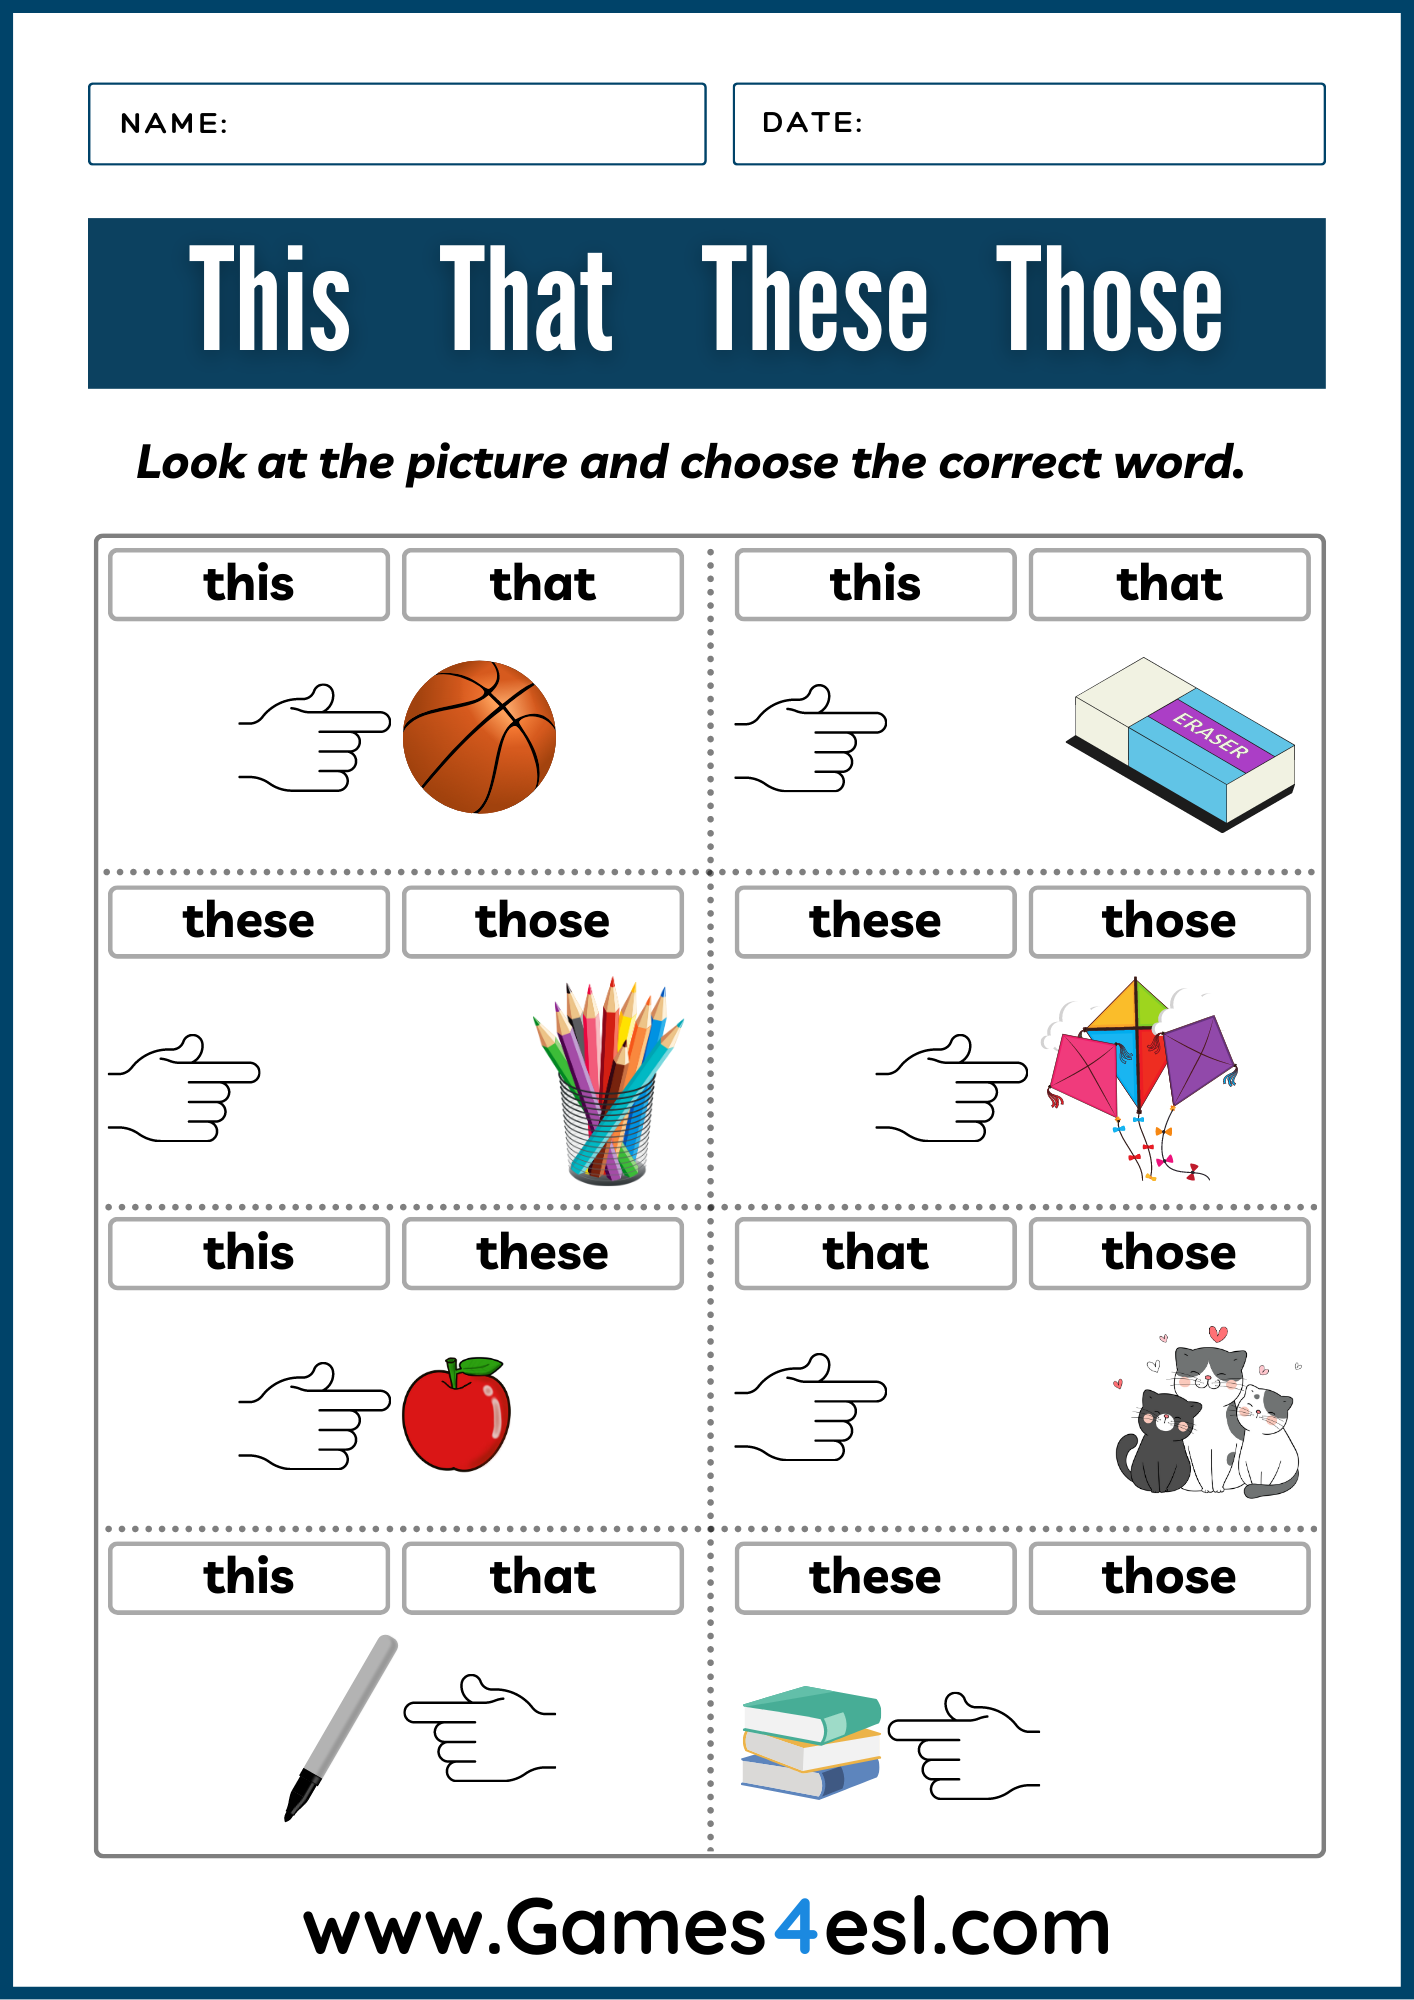 This That These Those Worksheets | Printable Demonstrative Pronoun